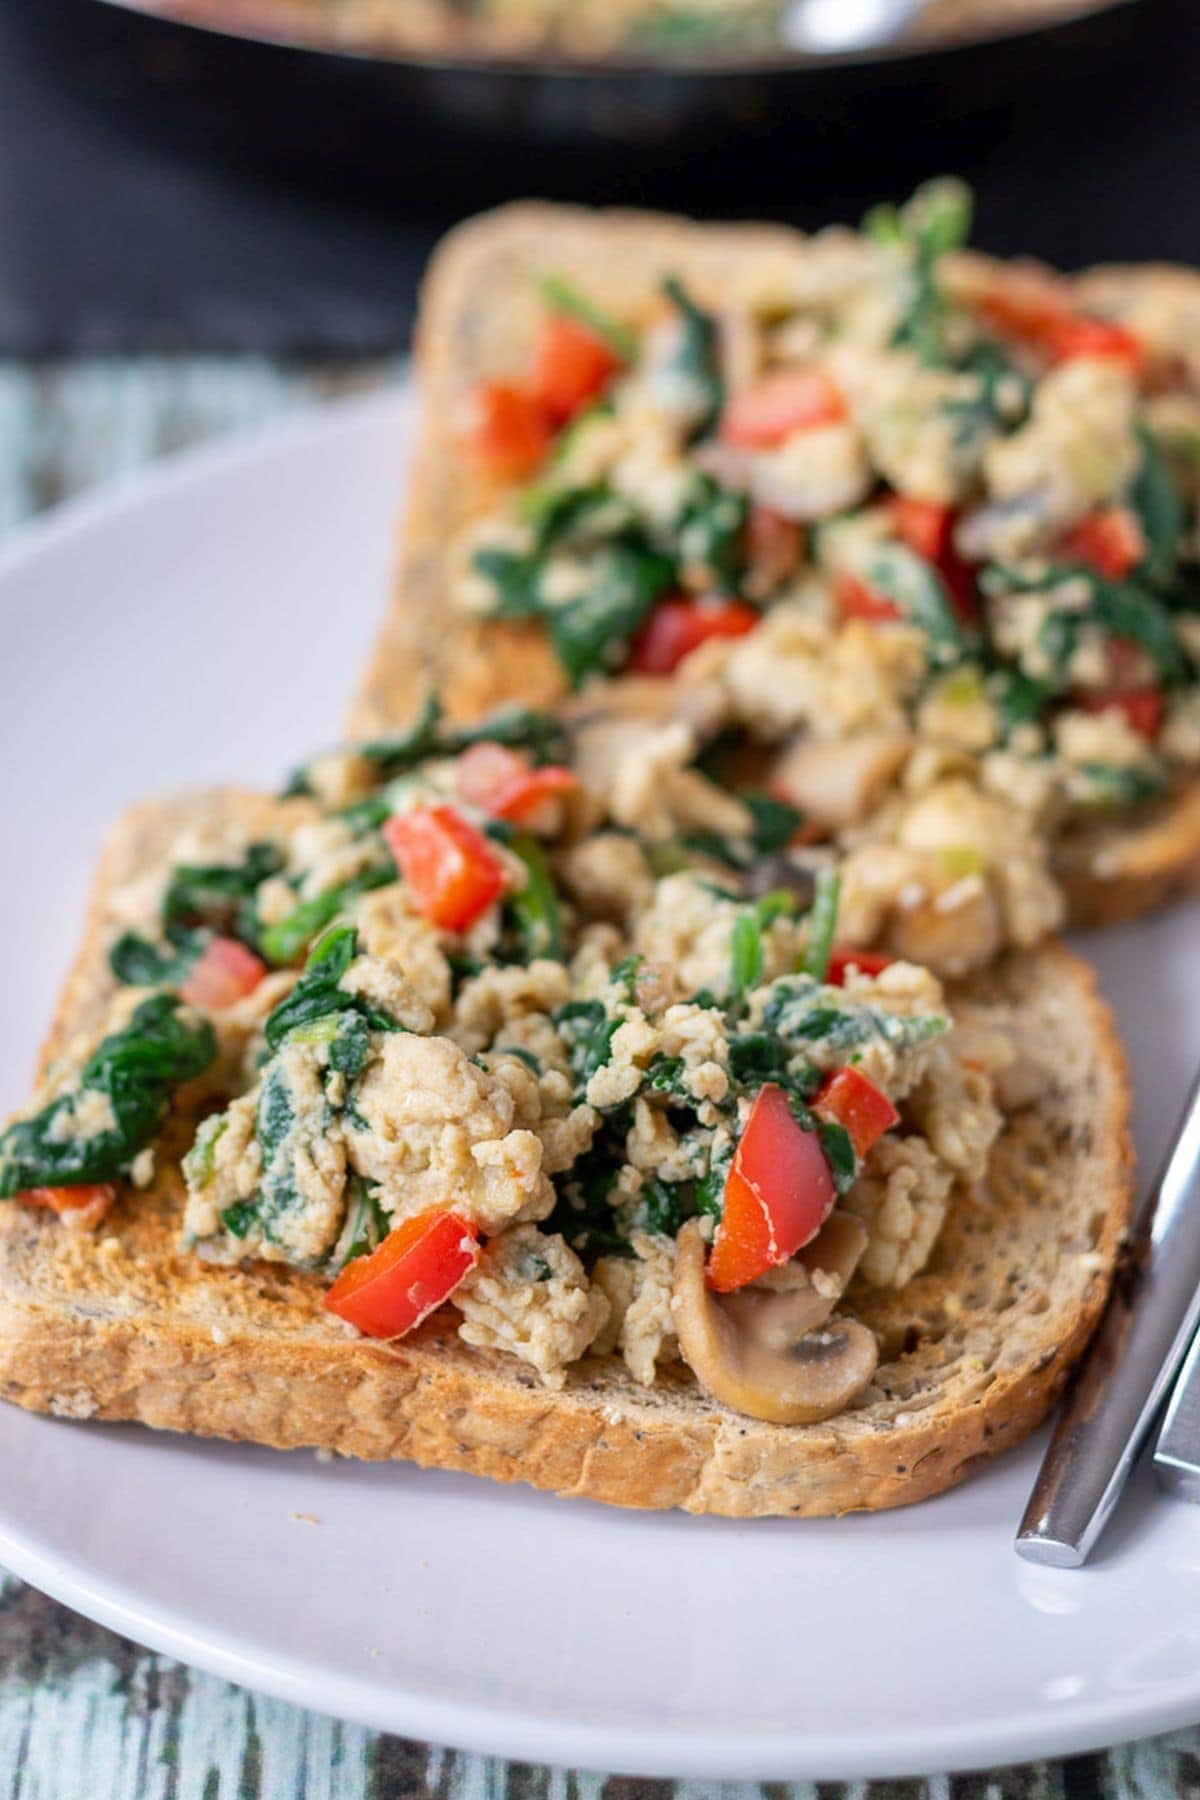 Two slices of toast with vegetable scrambled eggs on top.